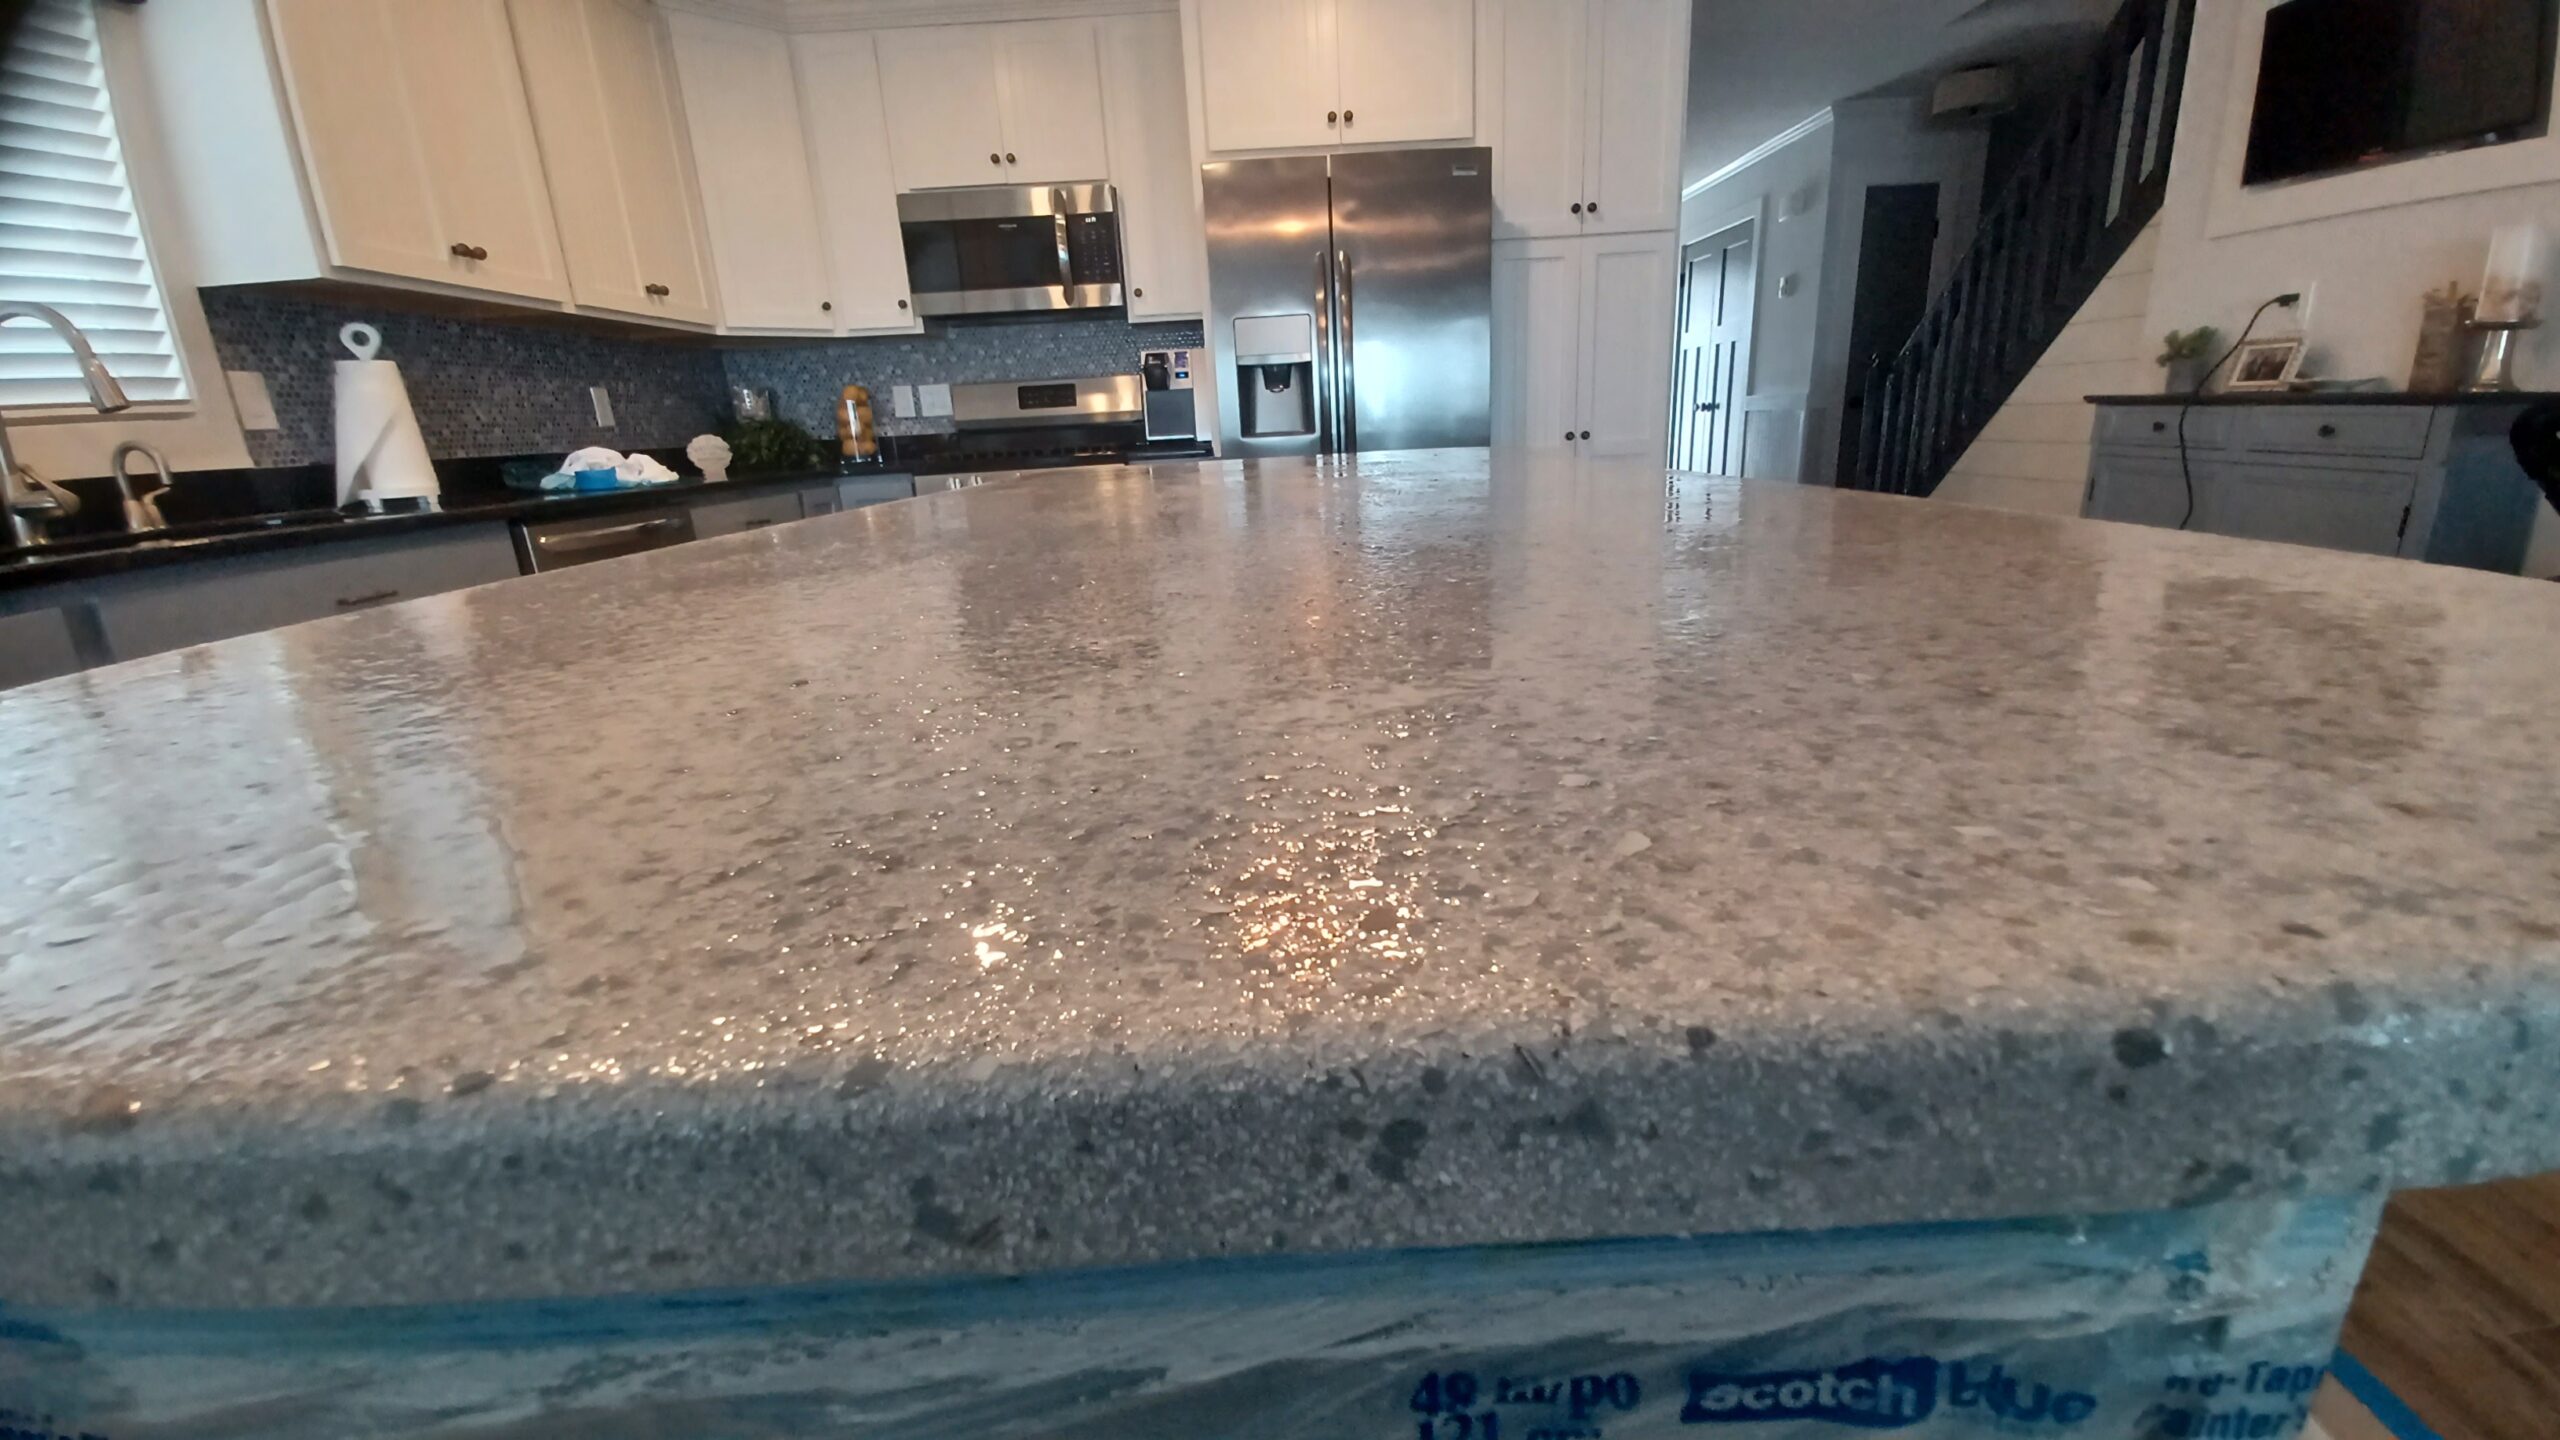 Celebrate Independence Day with a Stunning Kitchen Island Makeover in Seaside Heights, NJ!